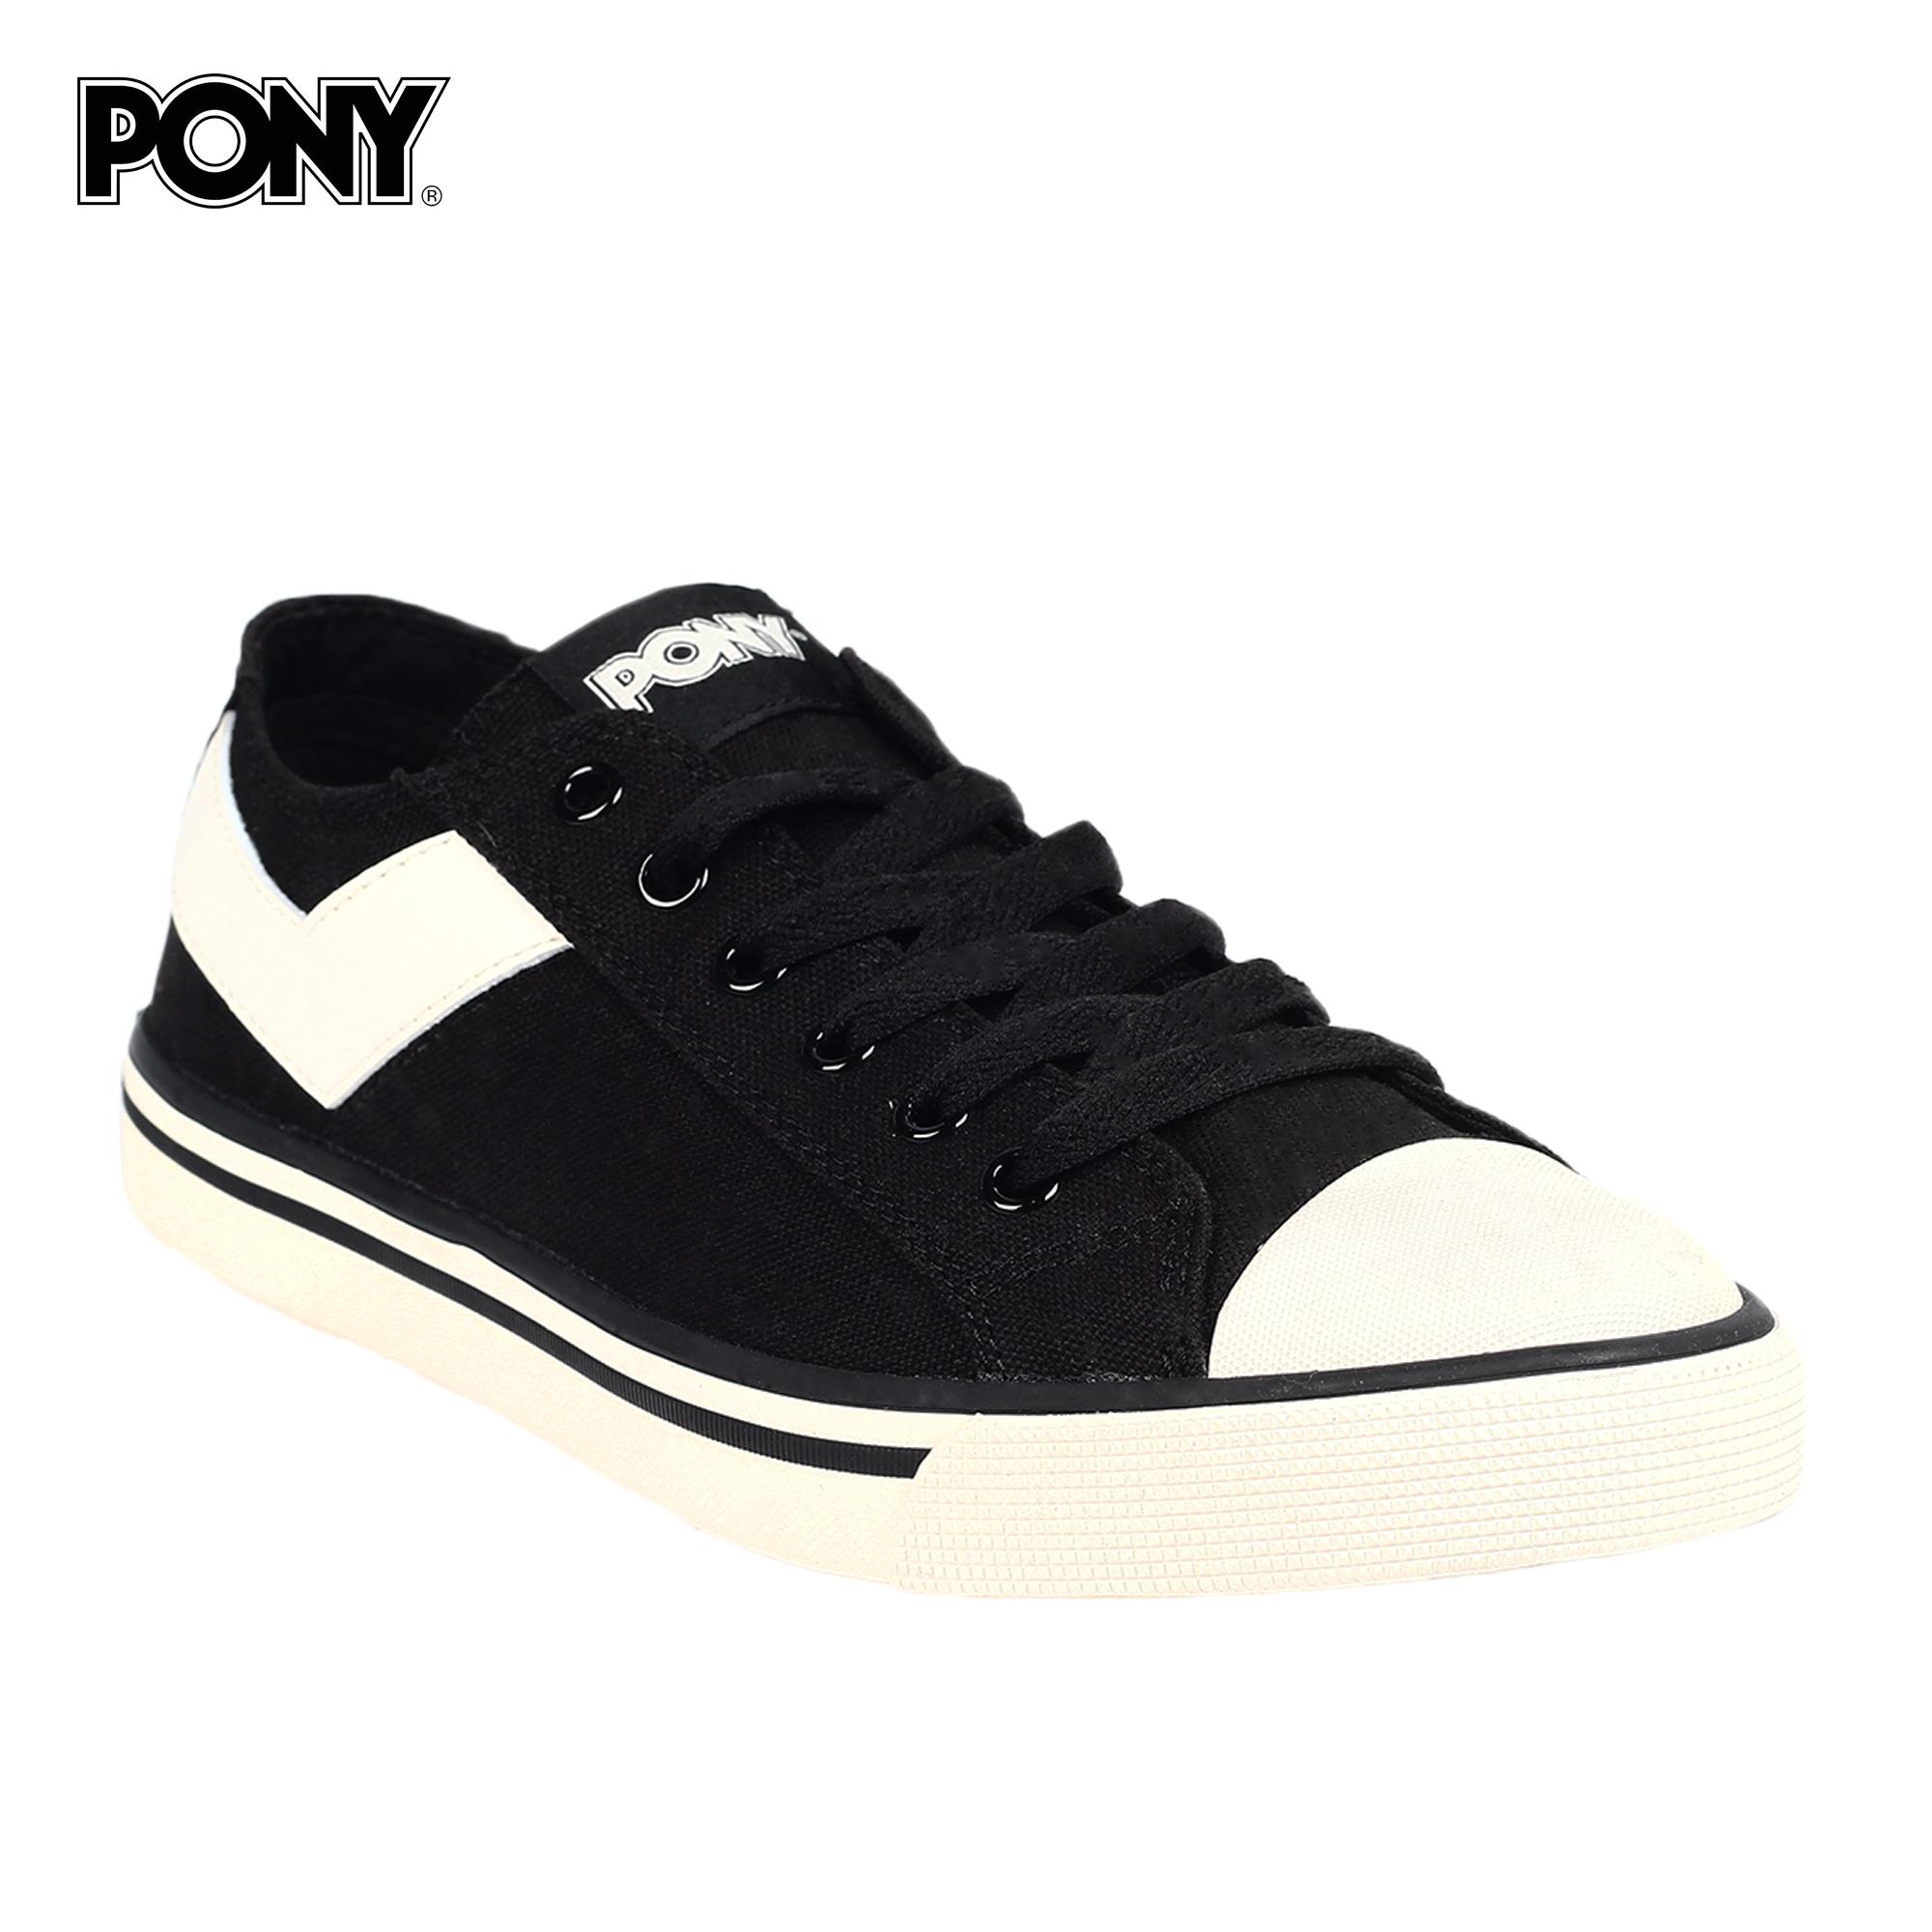 pony sneakers for sale